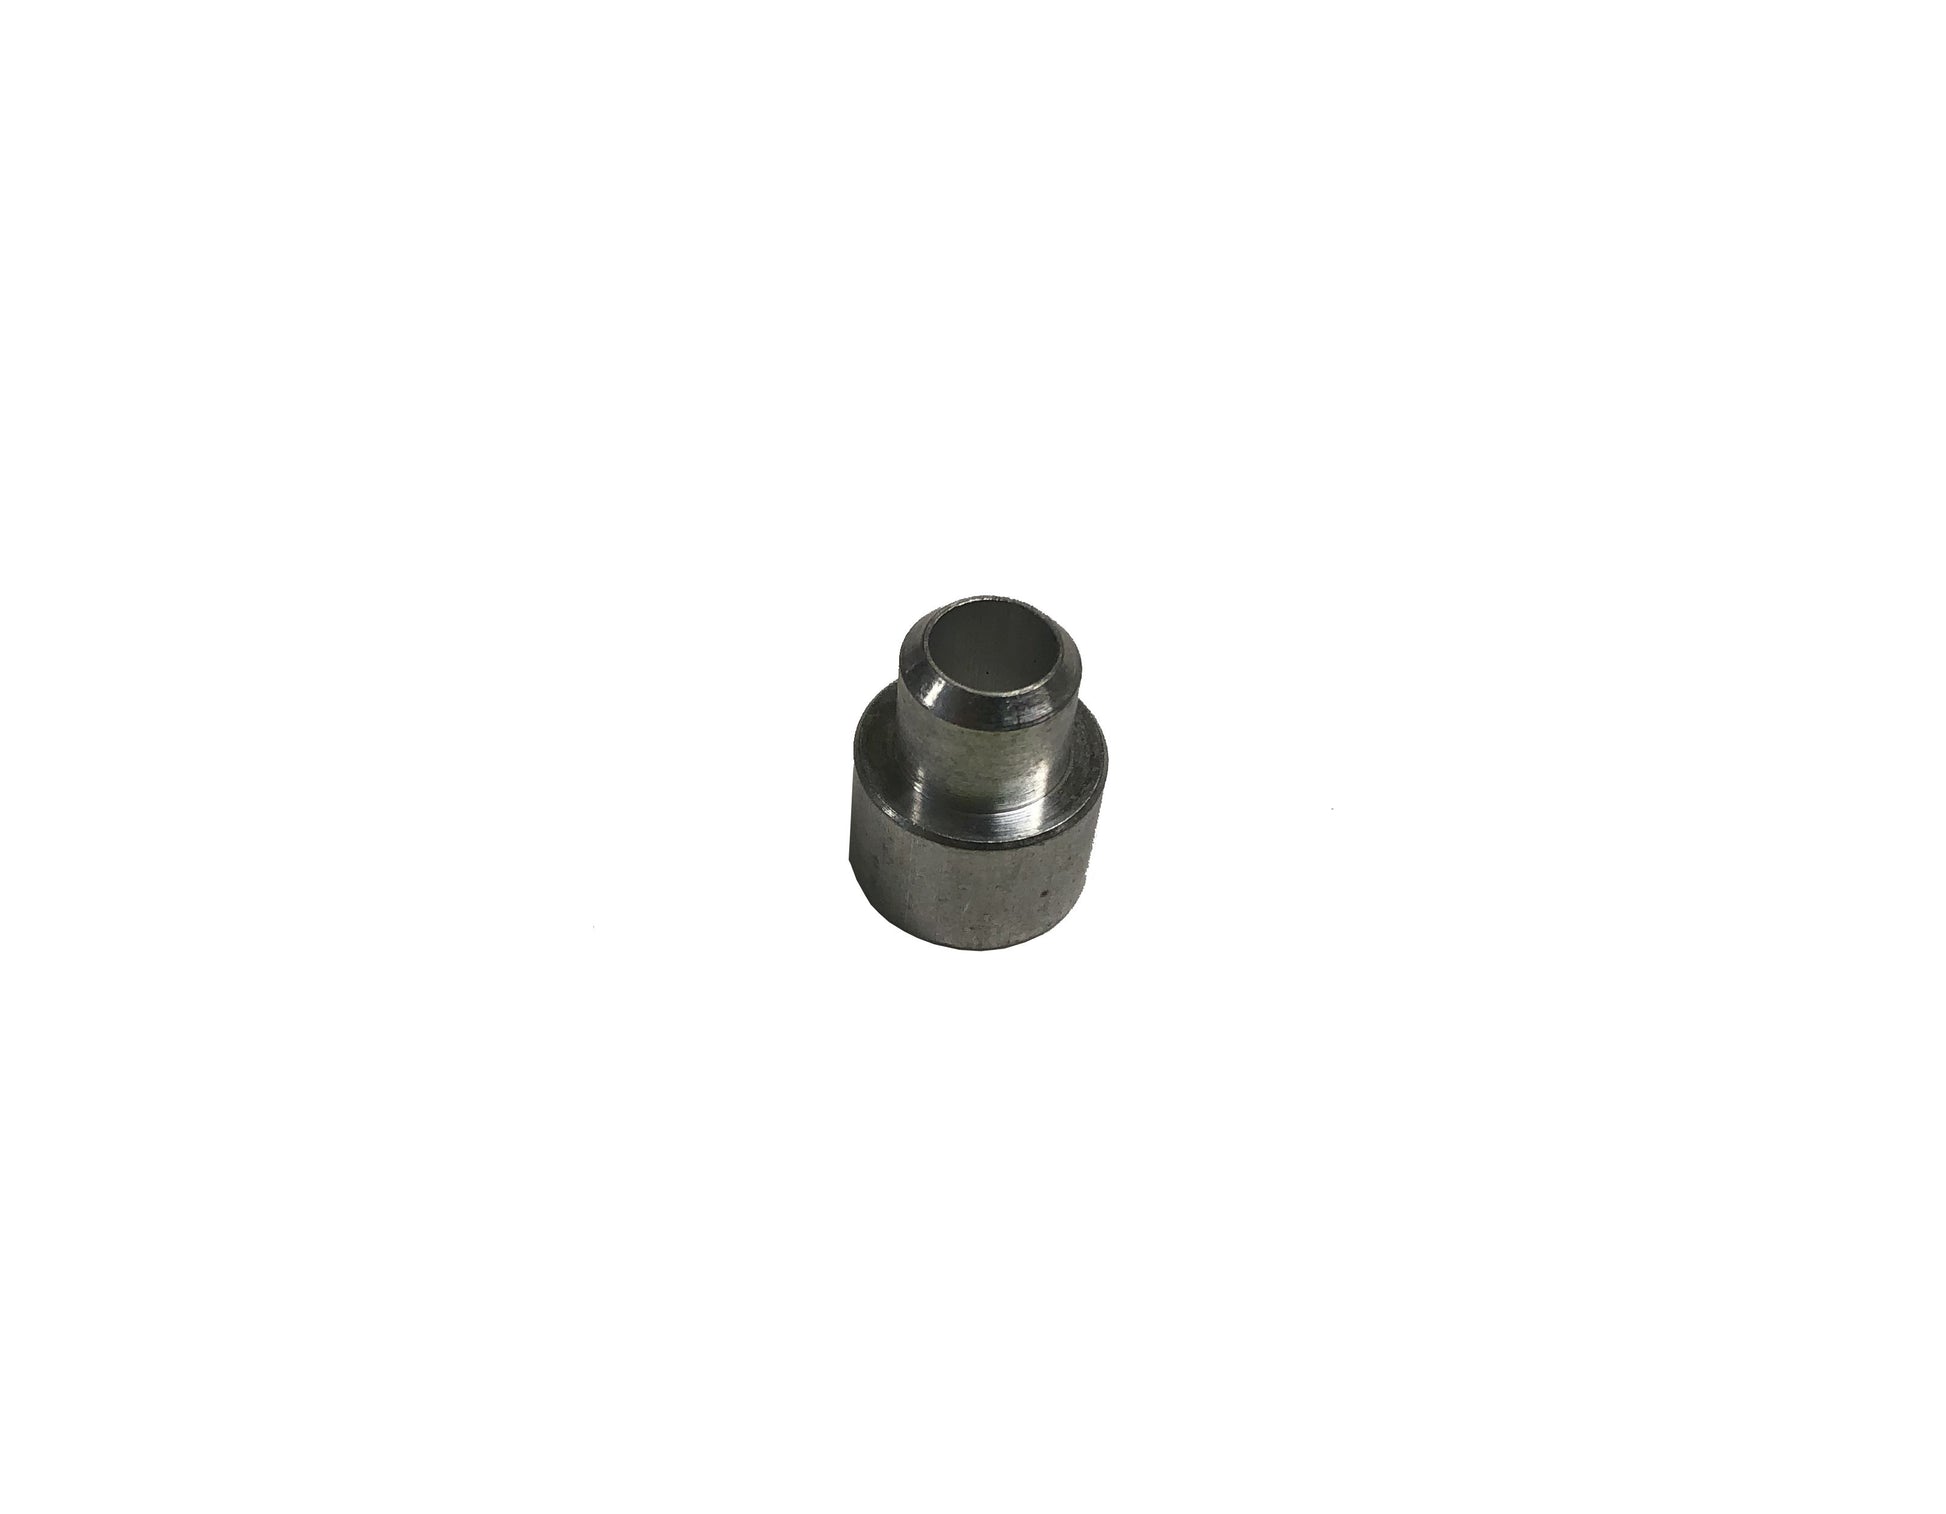 Broil King S21237 hinge pin spacer. Acting as a spacer between the barbecue cookbox and the hinge pin, this spacer allows the hinge pin to sit properly in place for easy lid lifting and closing. Available to order at Barbecues Galore.